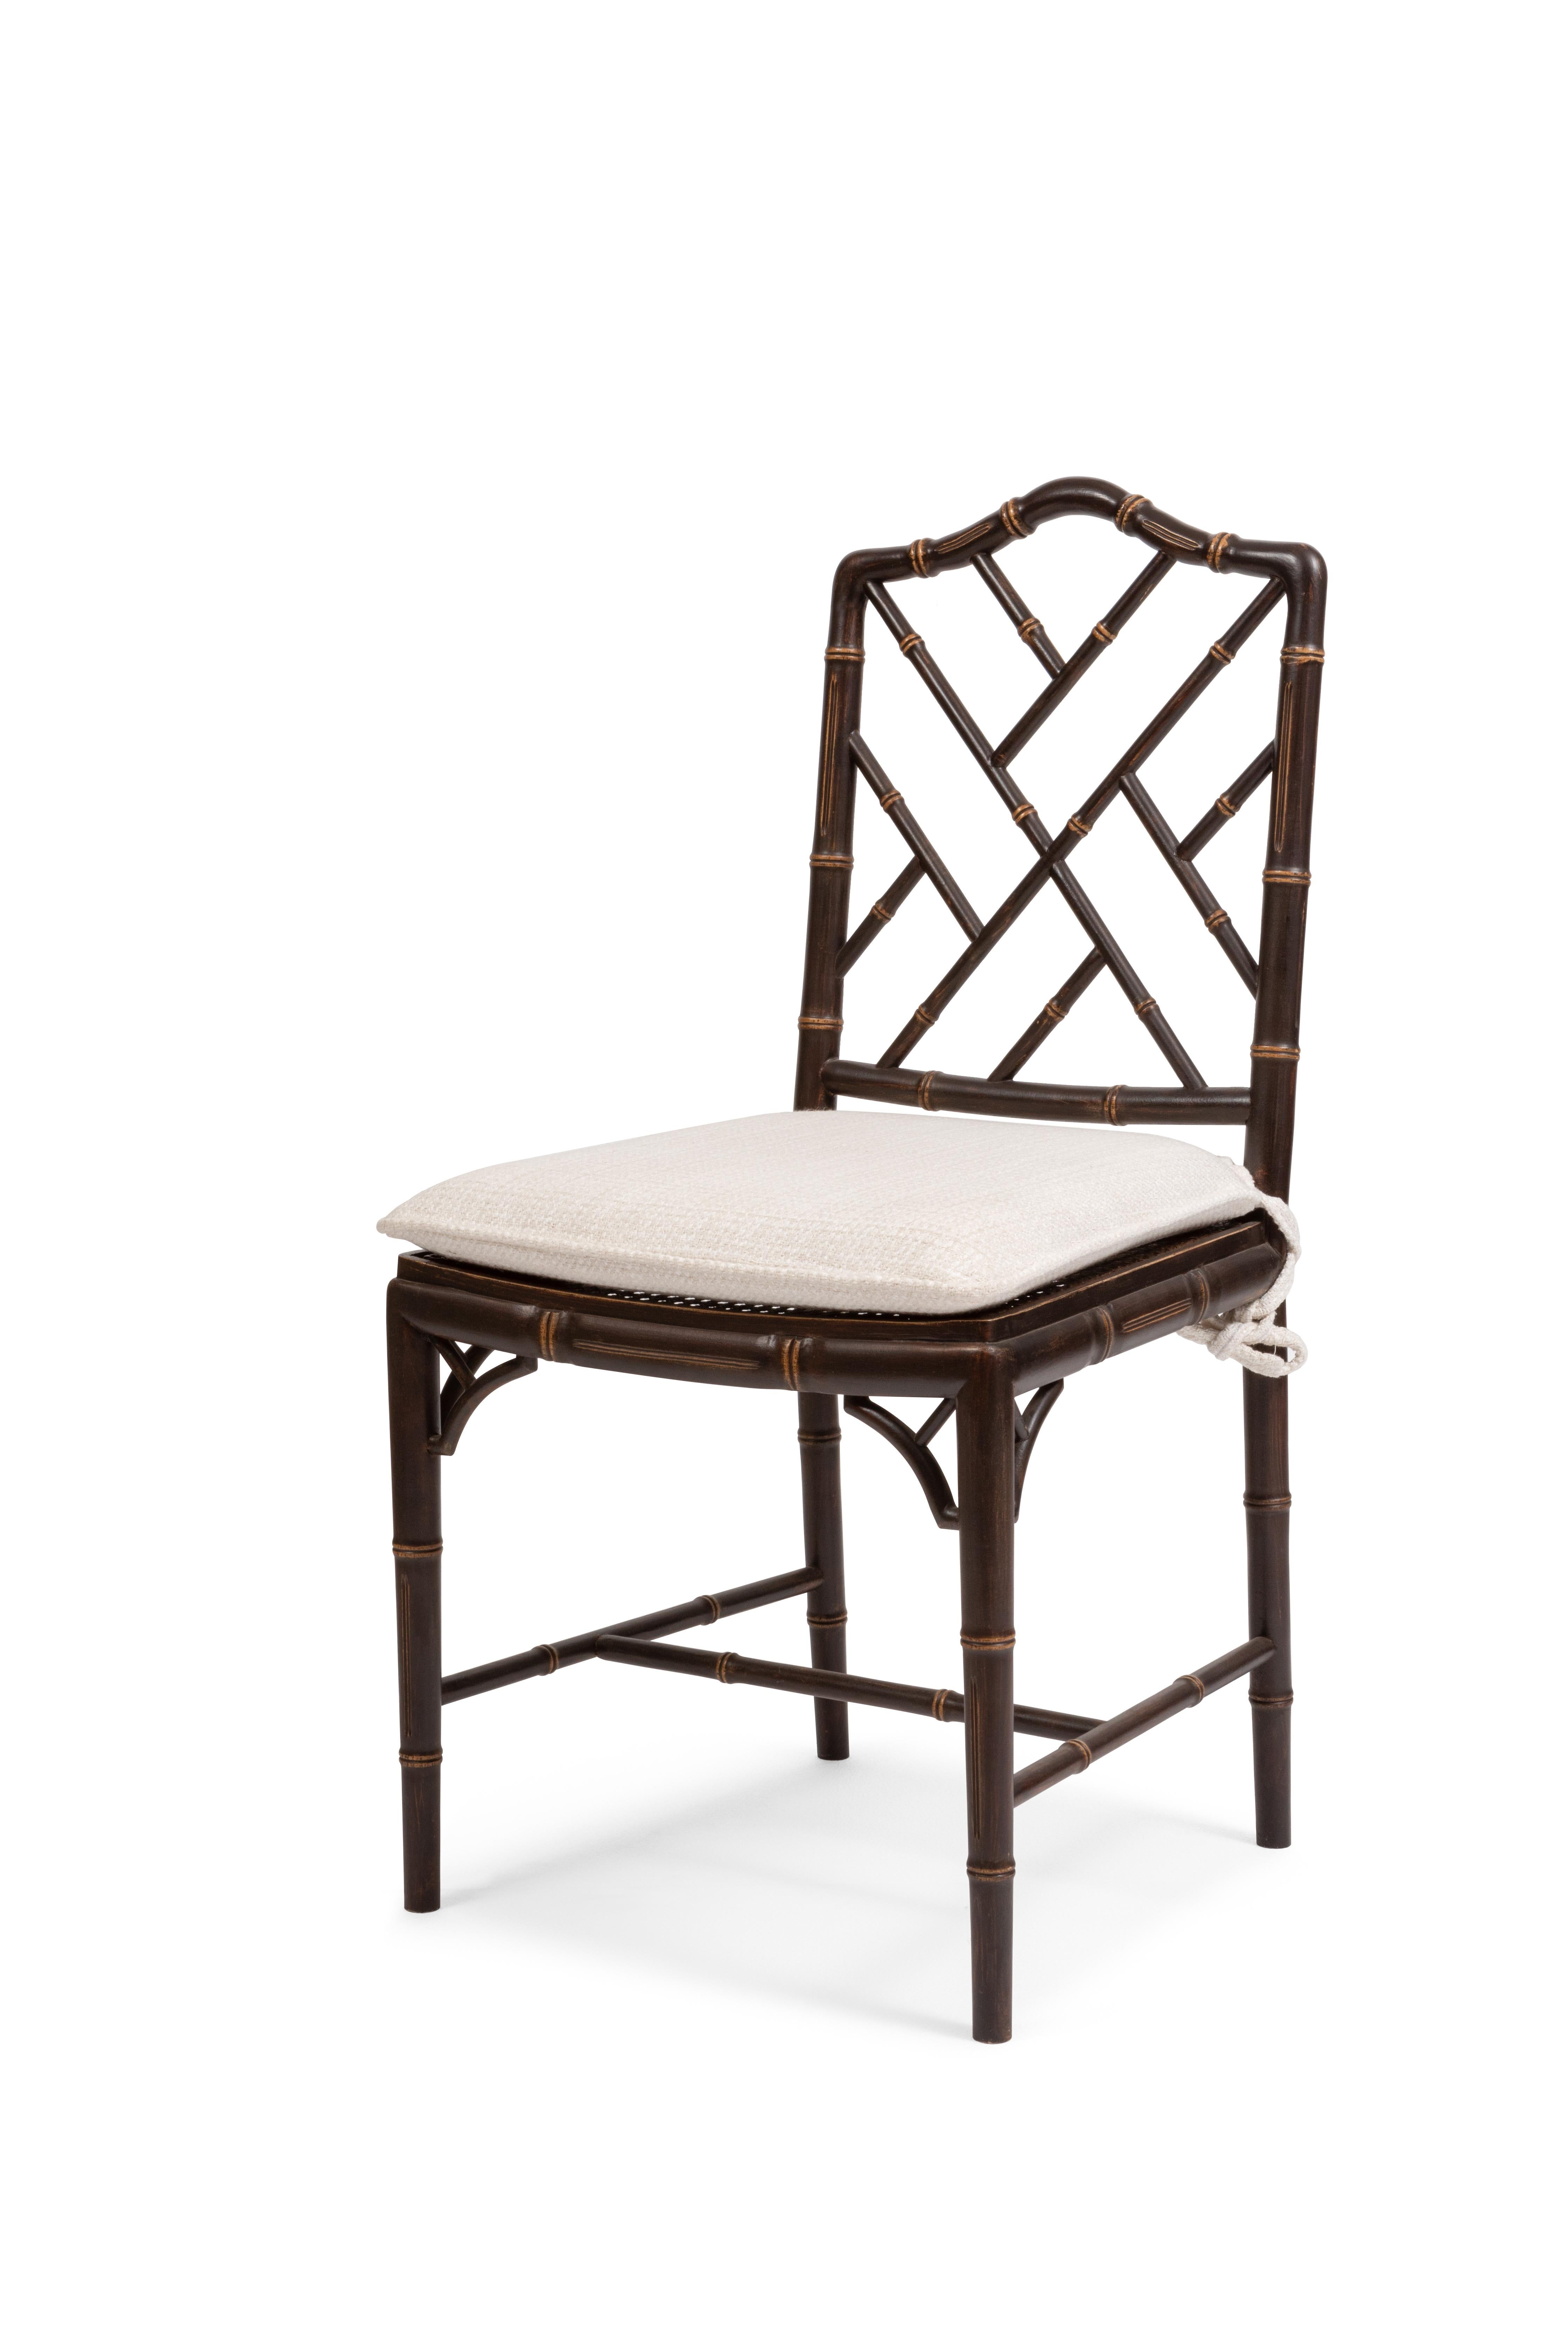 Wood chair Chinese Chippendale style inspired. This chair belongs to 